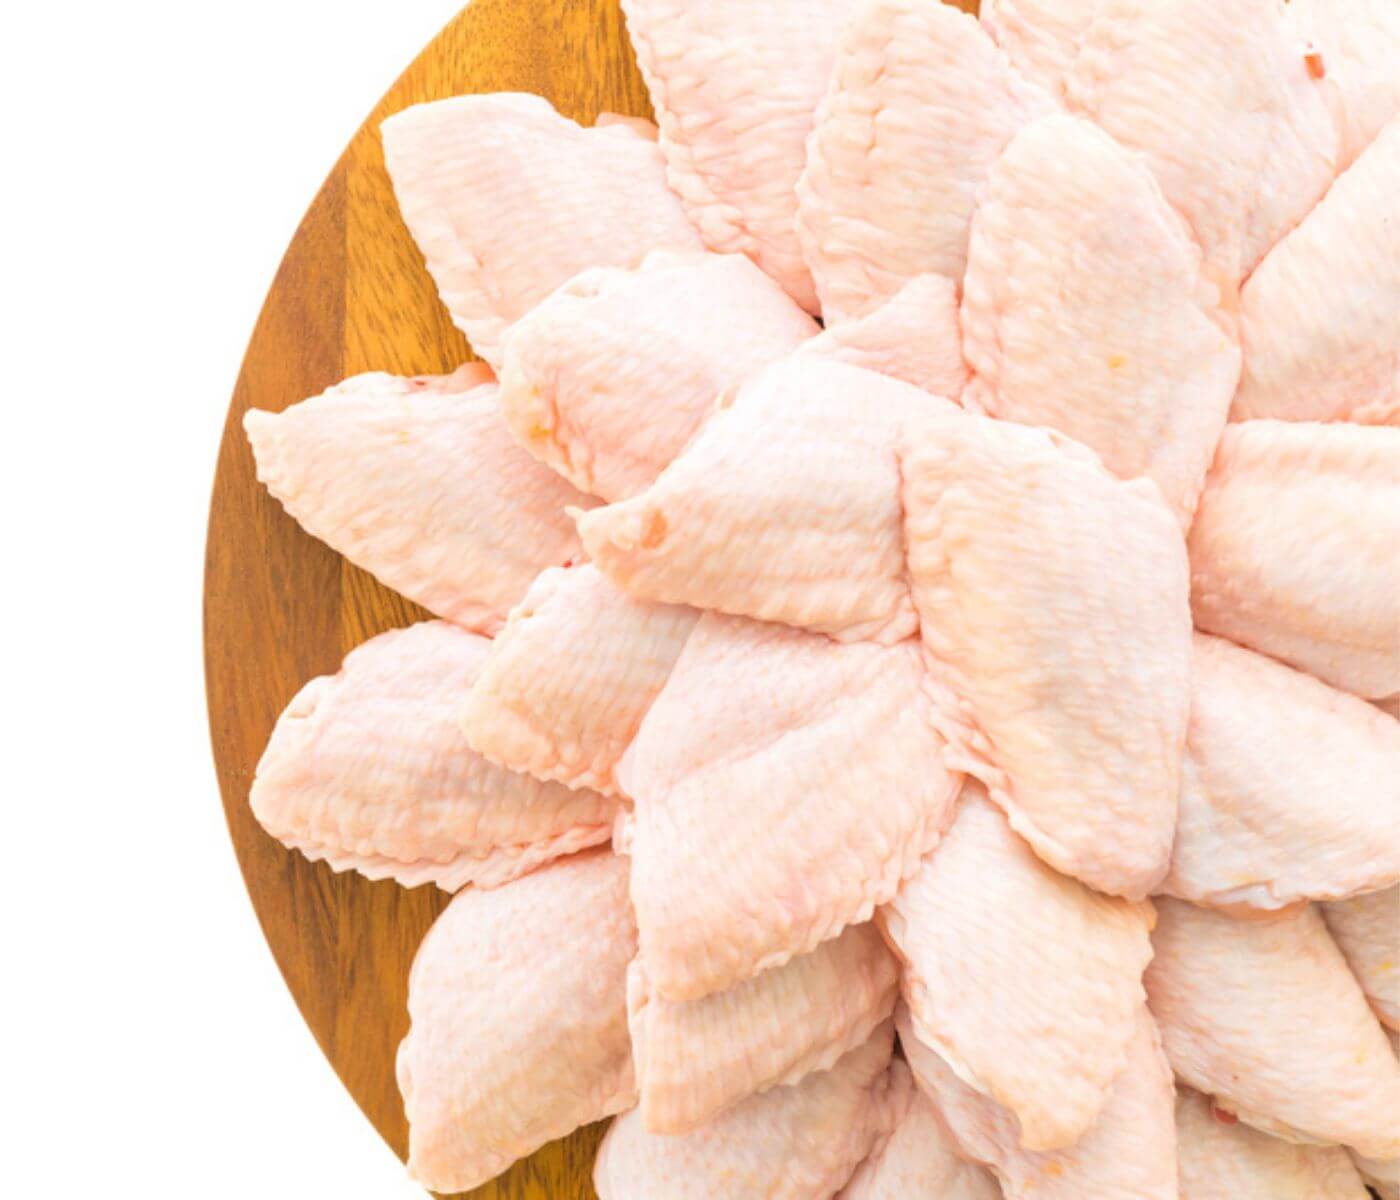 Chicken wings and breasts as relief for consumers during inflation season